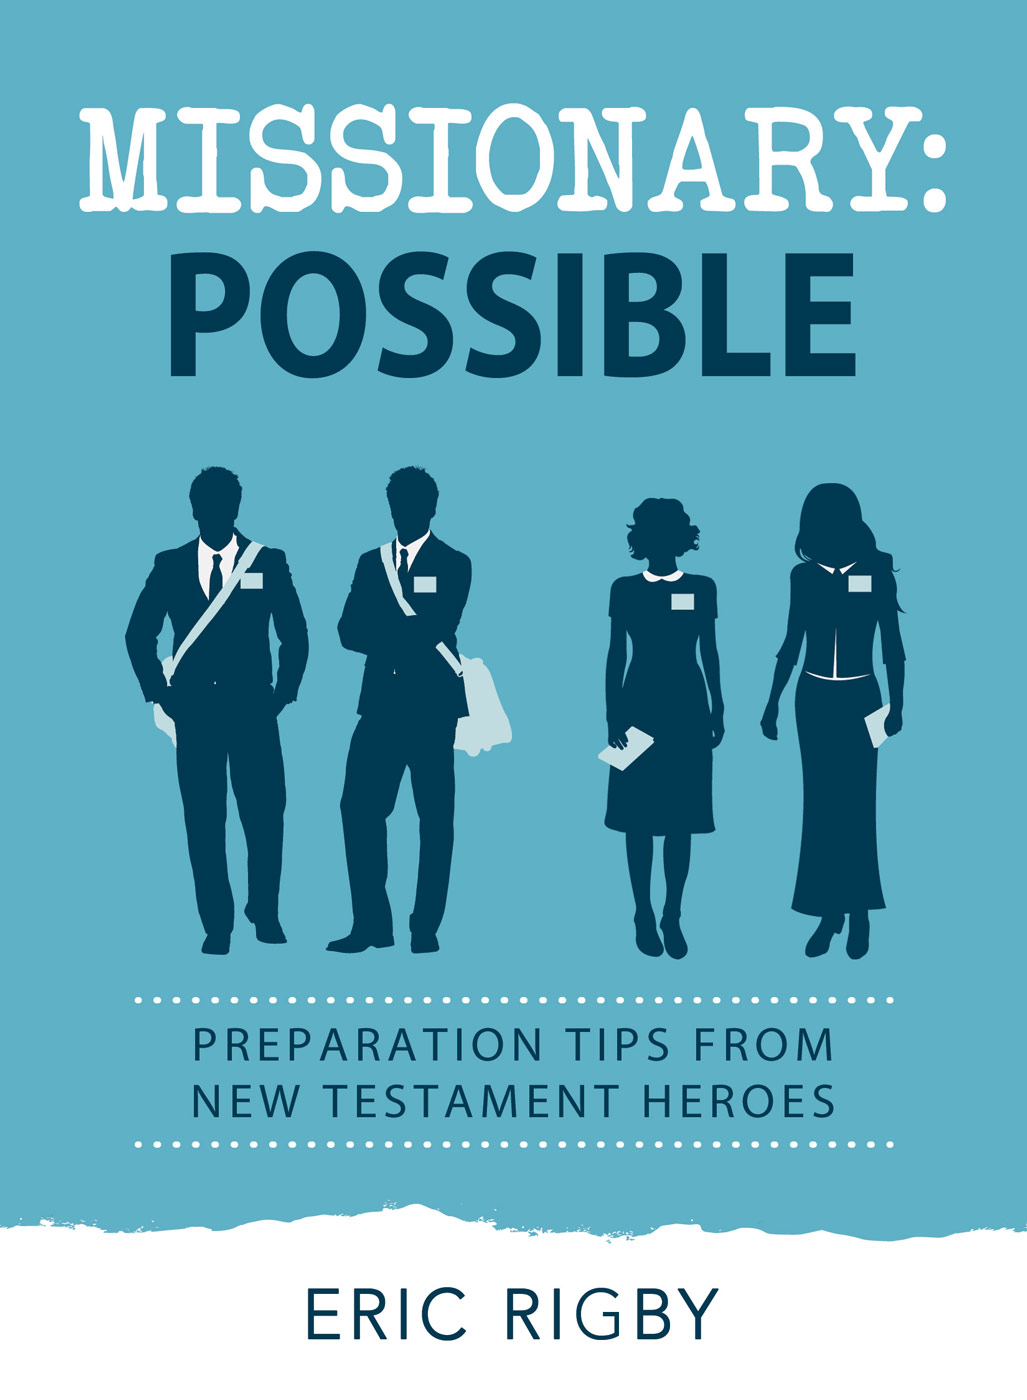 Missionary Possible by Eric Rigby~ Blog Tour